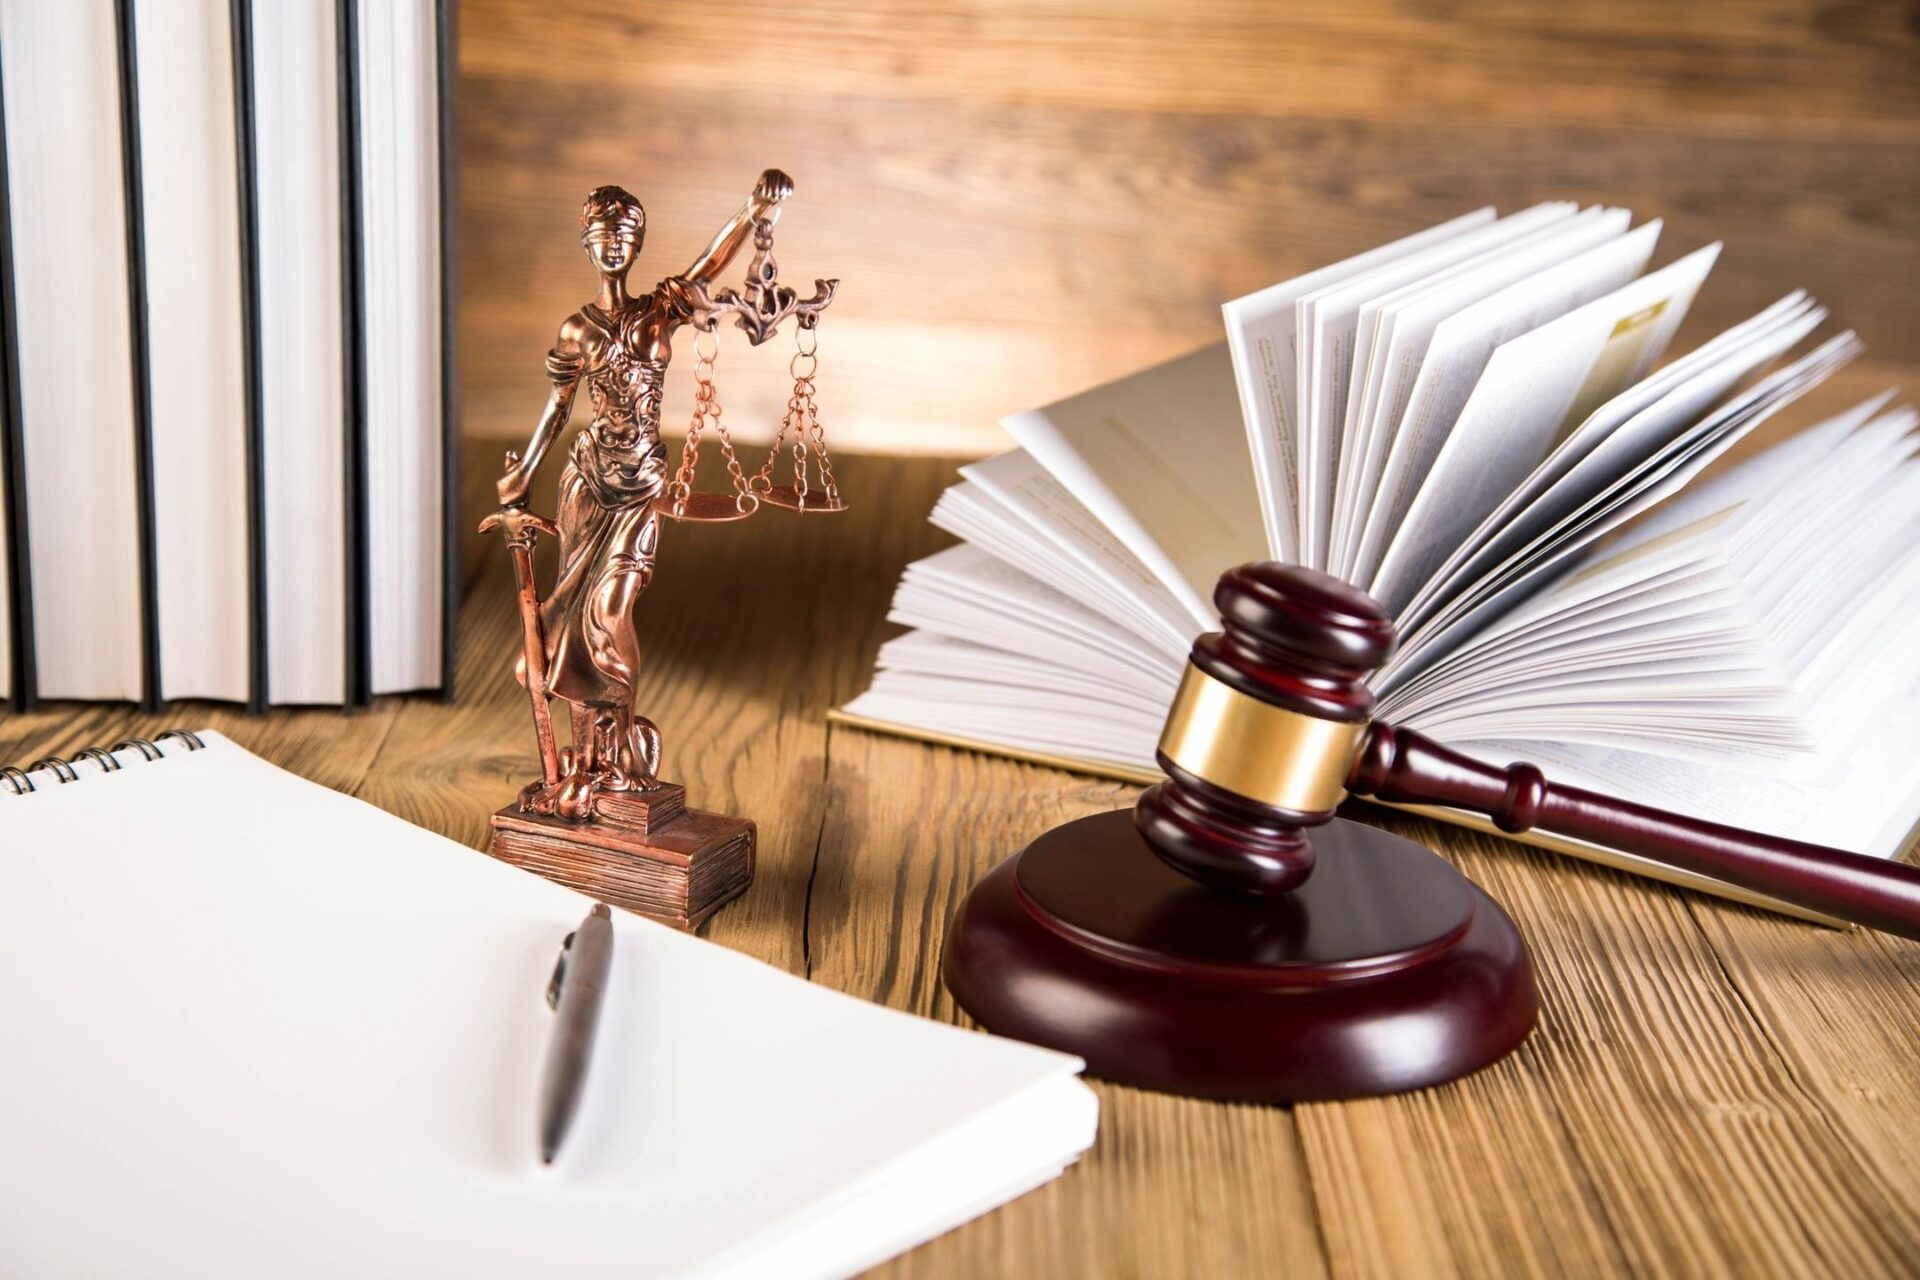 Lady of justice, wooden & gold gavel and books on wooden table